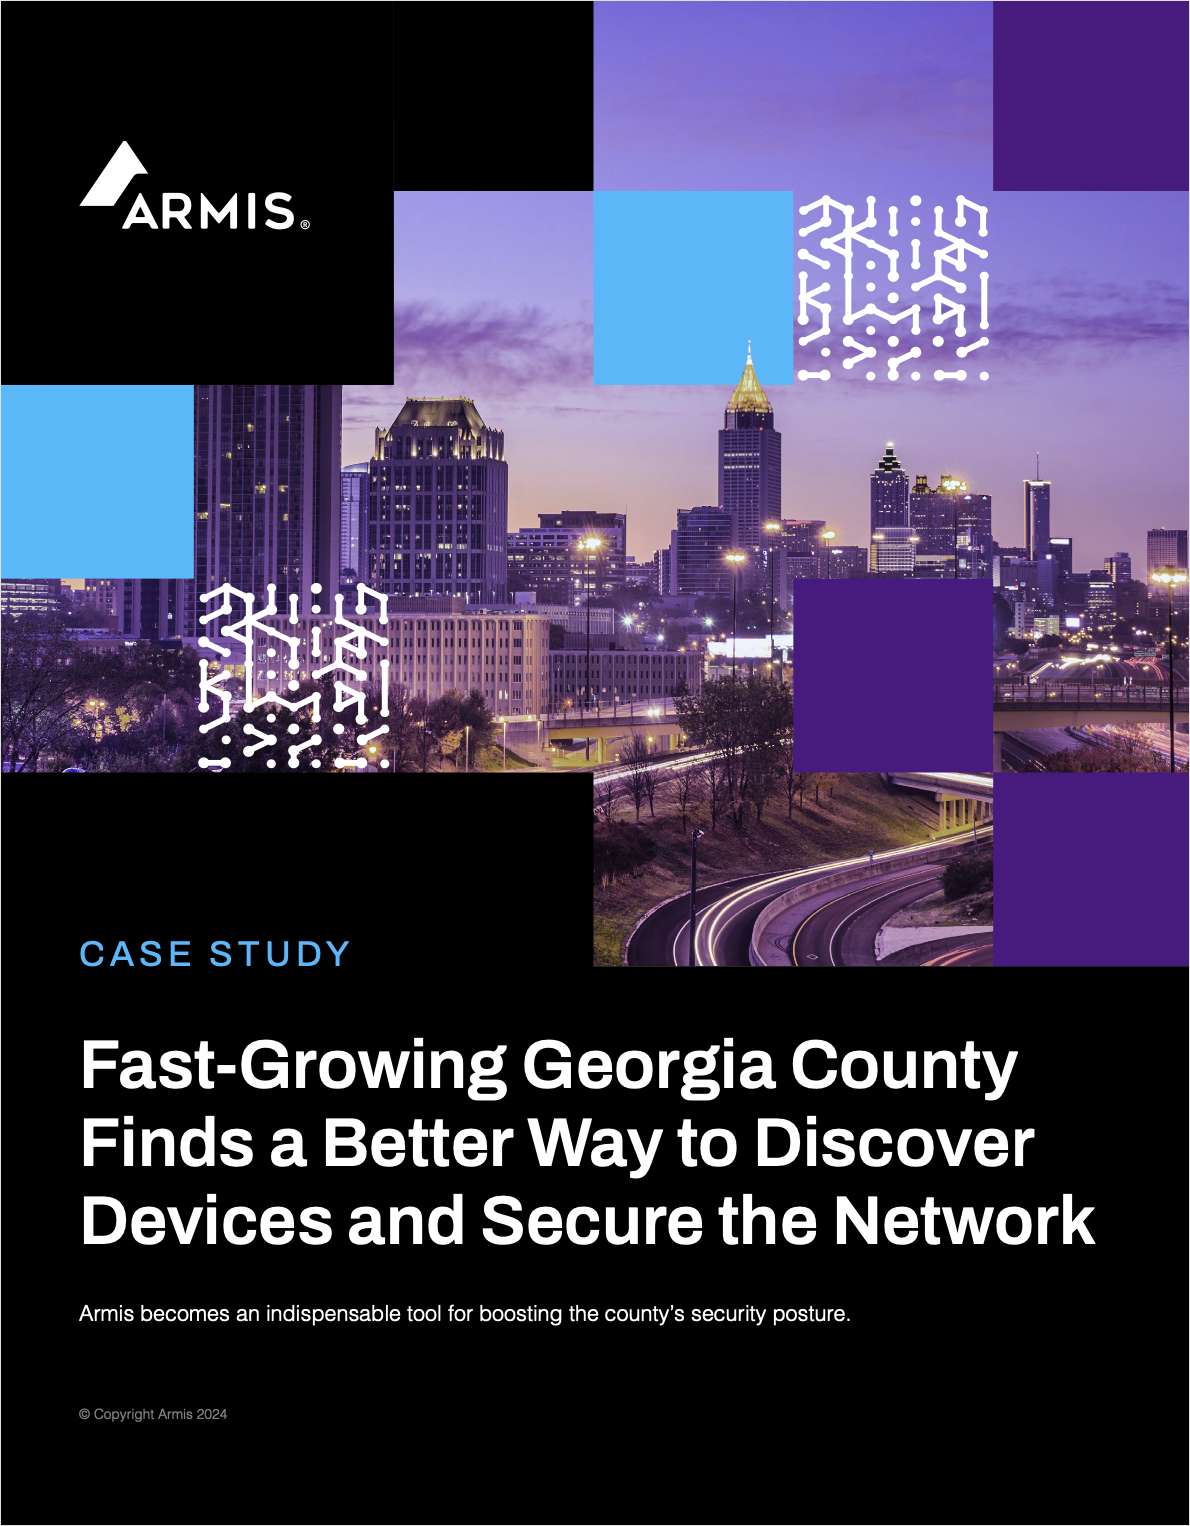 Fast-Growing Georgia County Finds a Better Way to Discover Devices and Secure the Network